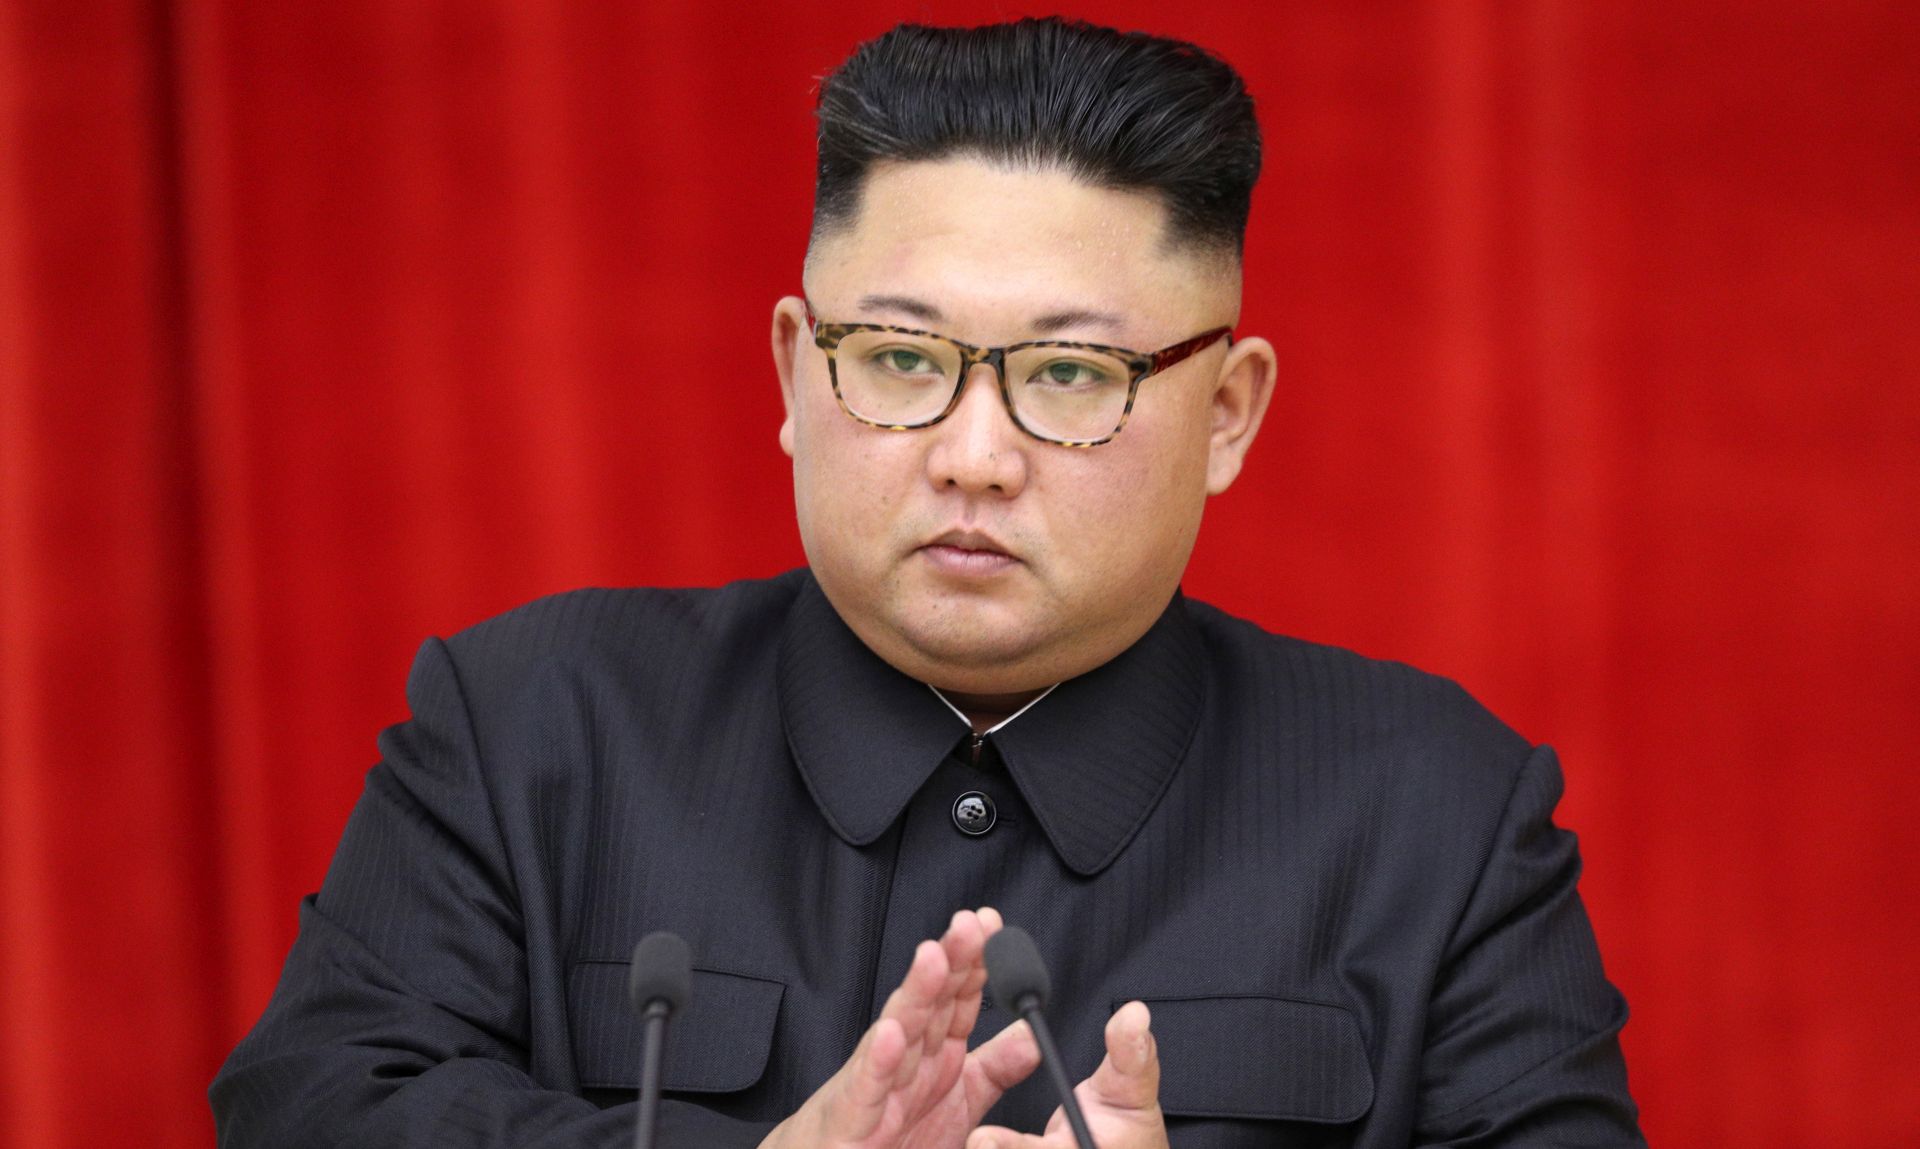 epa07030059 North Korean leader Kim Jong-un, speaks during a welcome banquet for South Korean president Moon Jae-in (not pictured) at the Mokrankwan in Pyongyang, North Korea, 18 September 2018. The third Inter-Korean summit takes place from 18 to 20 September in Pyongyang between South Korean President Moon Jae-in and North Korean leader Kim Jong-un.  EPA/PYONGYANG PRESS CORPS / POOL